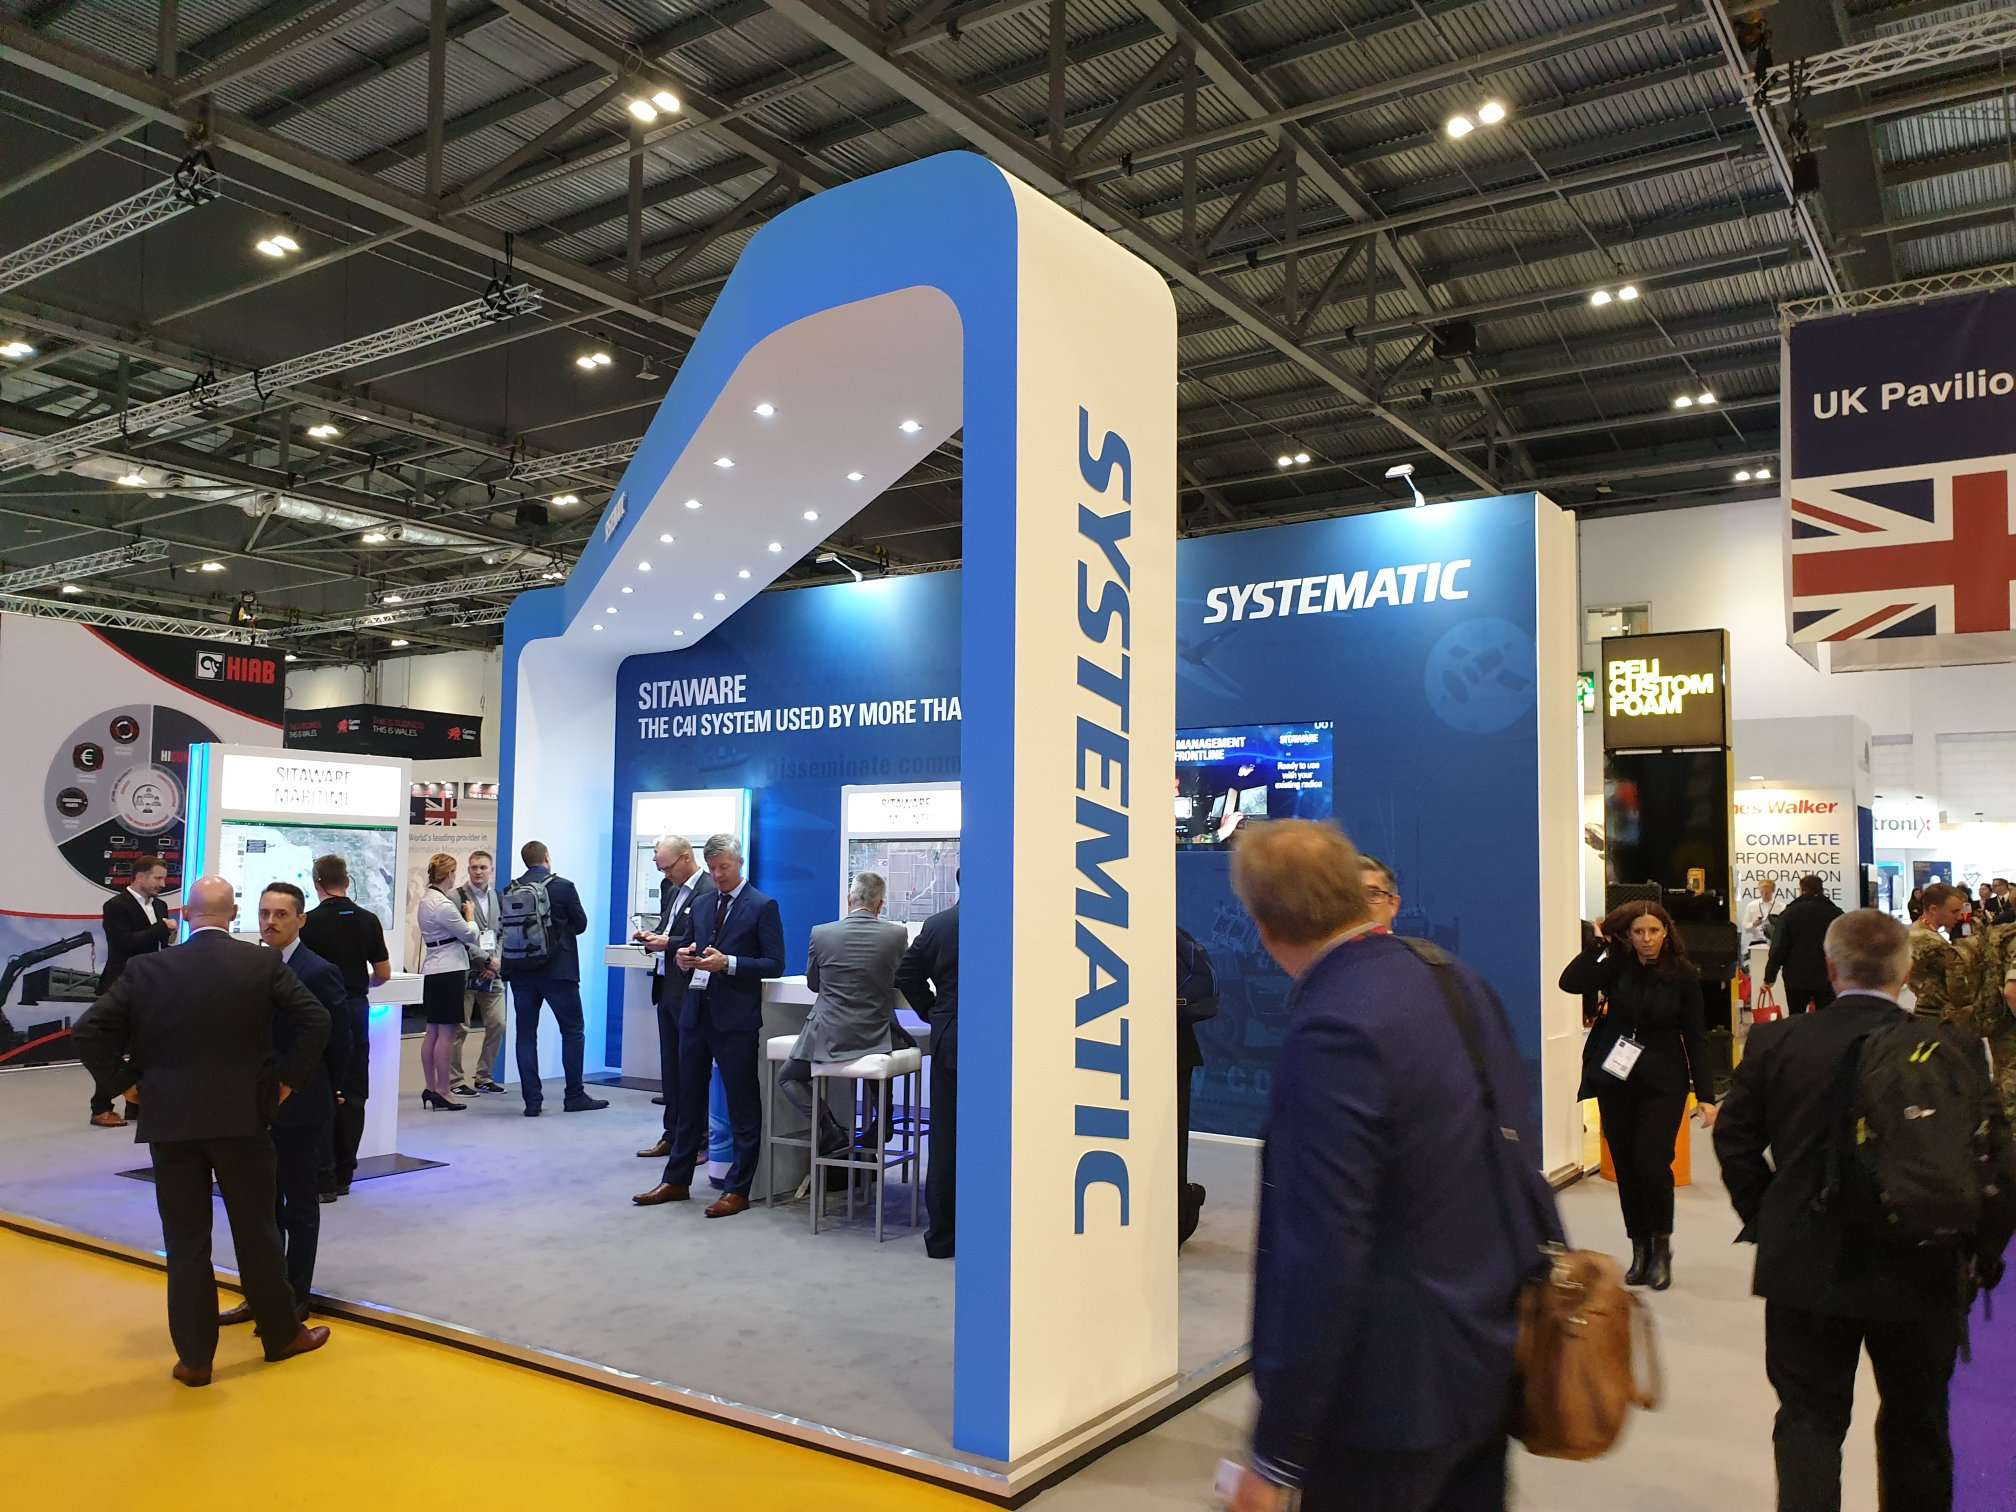 SYSTEMATIC DSEI 2019 London